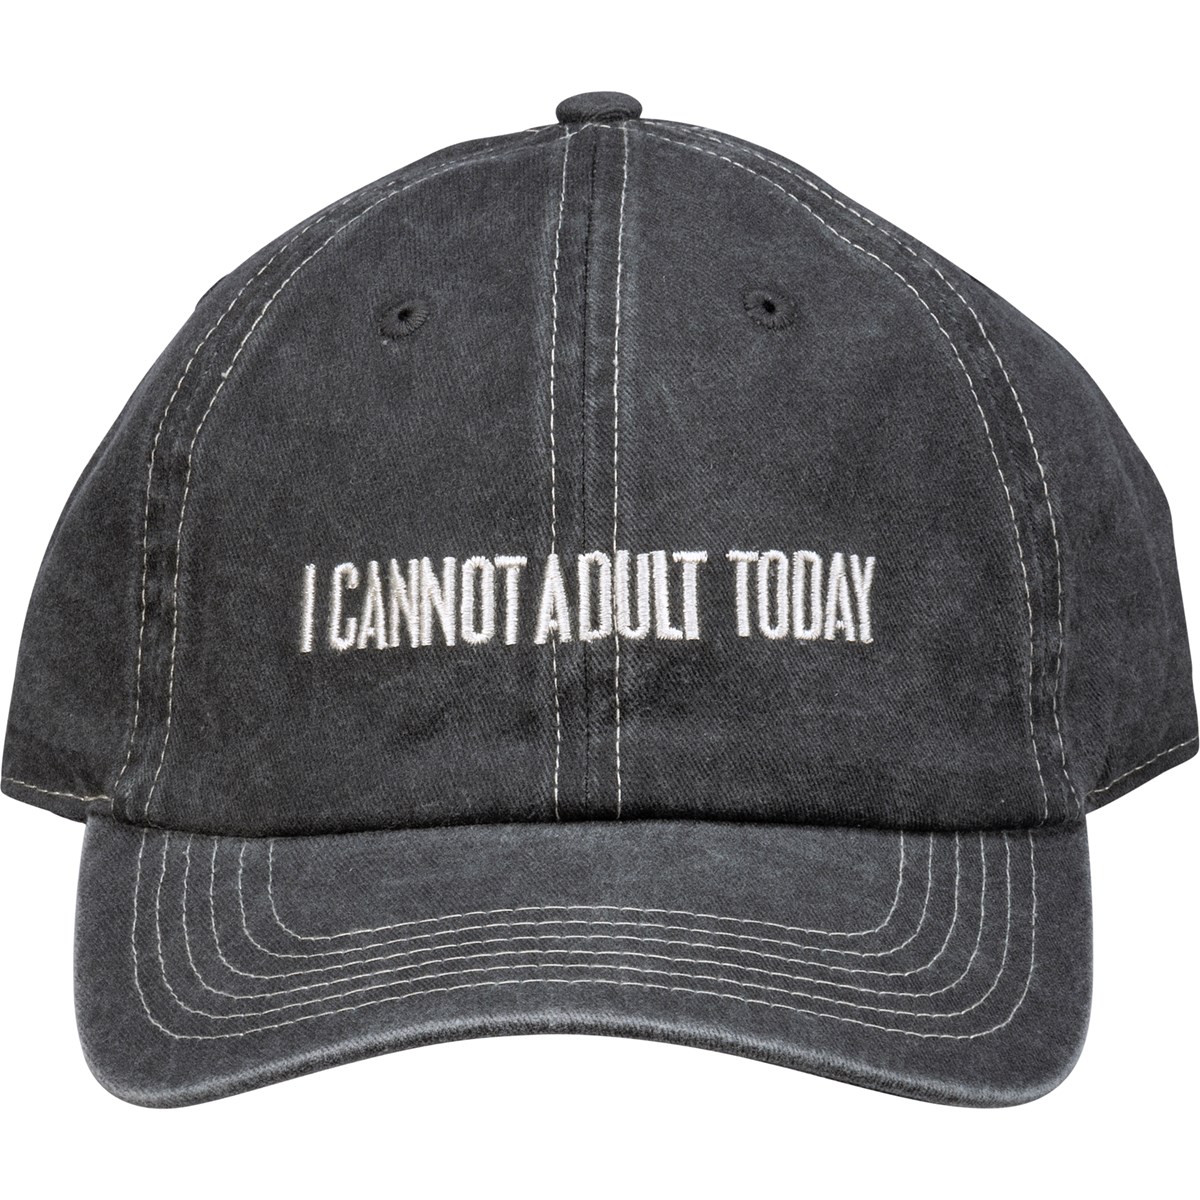 Baseball Cap - I Cannot Adult Today - One Size Fits Most - Cotton, Metal